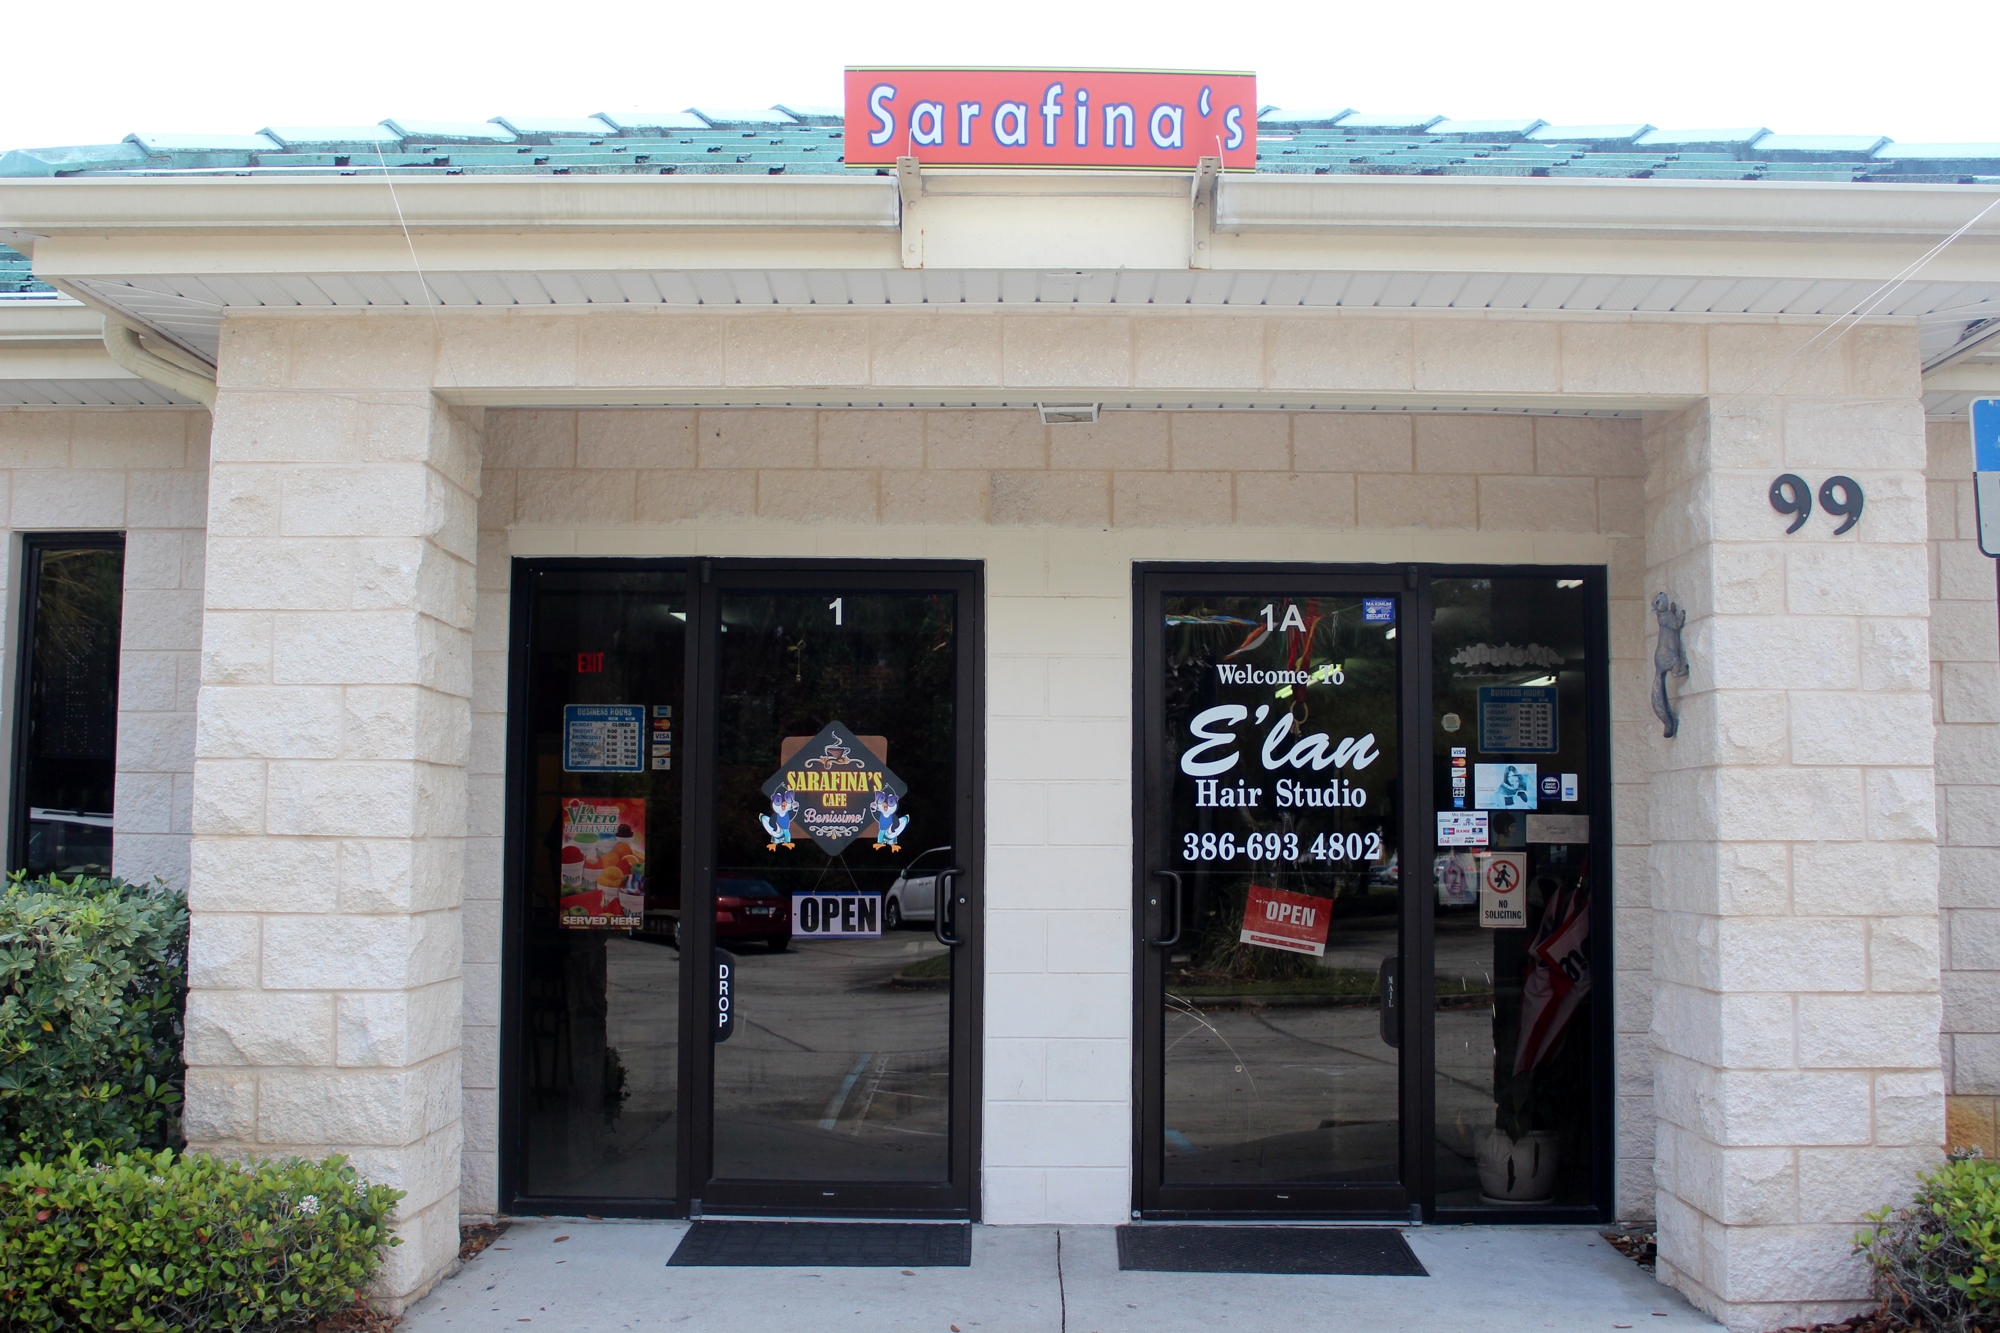 Sarafina Cafe is located right next to the E'lan Family Hair Studio.